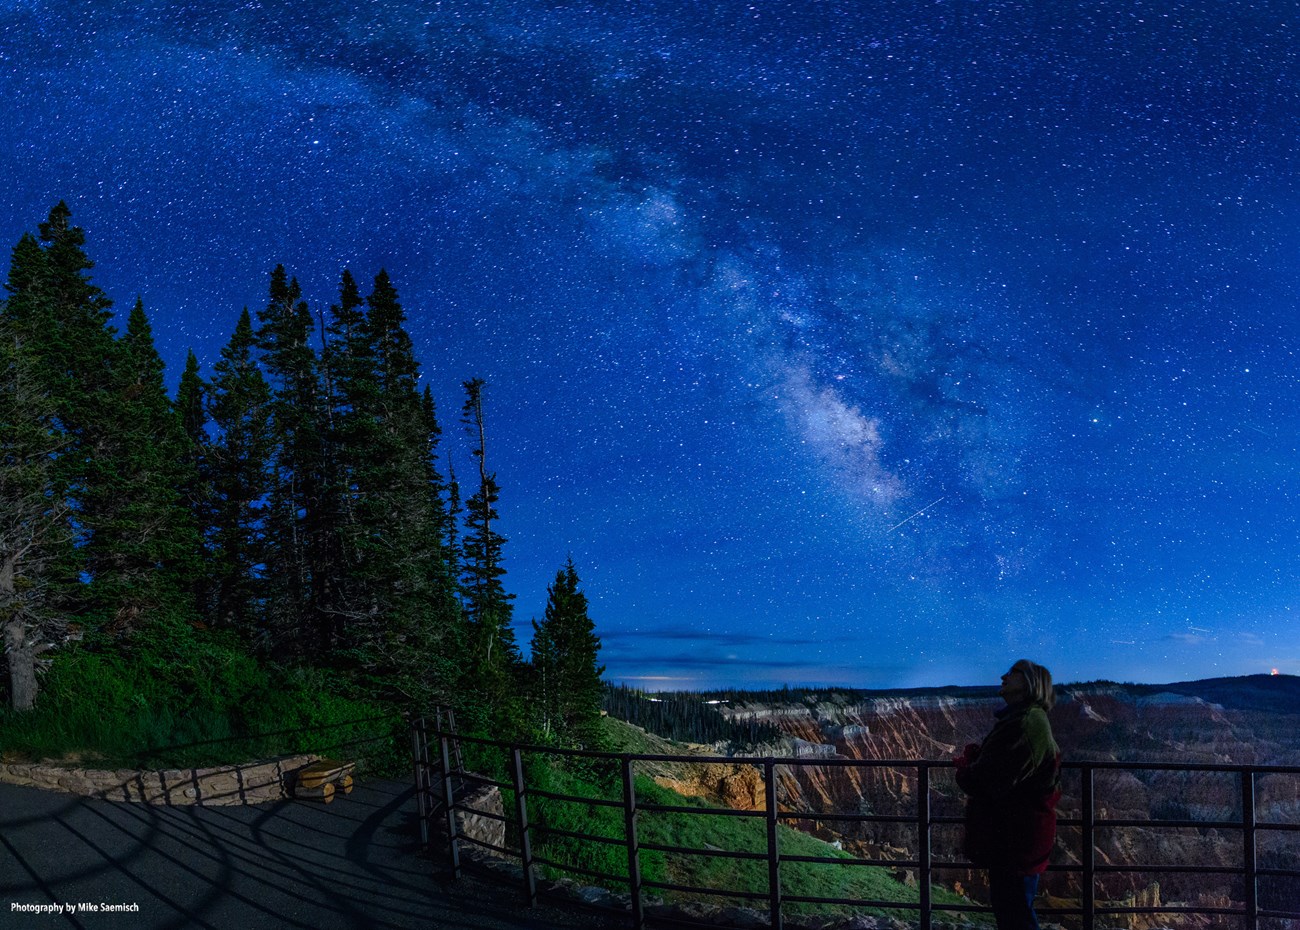 Milky Way arches over Cedar Breaks National Monument at night